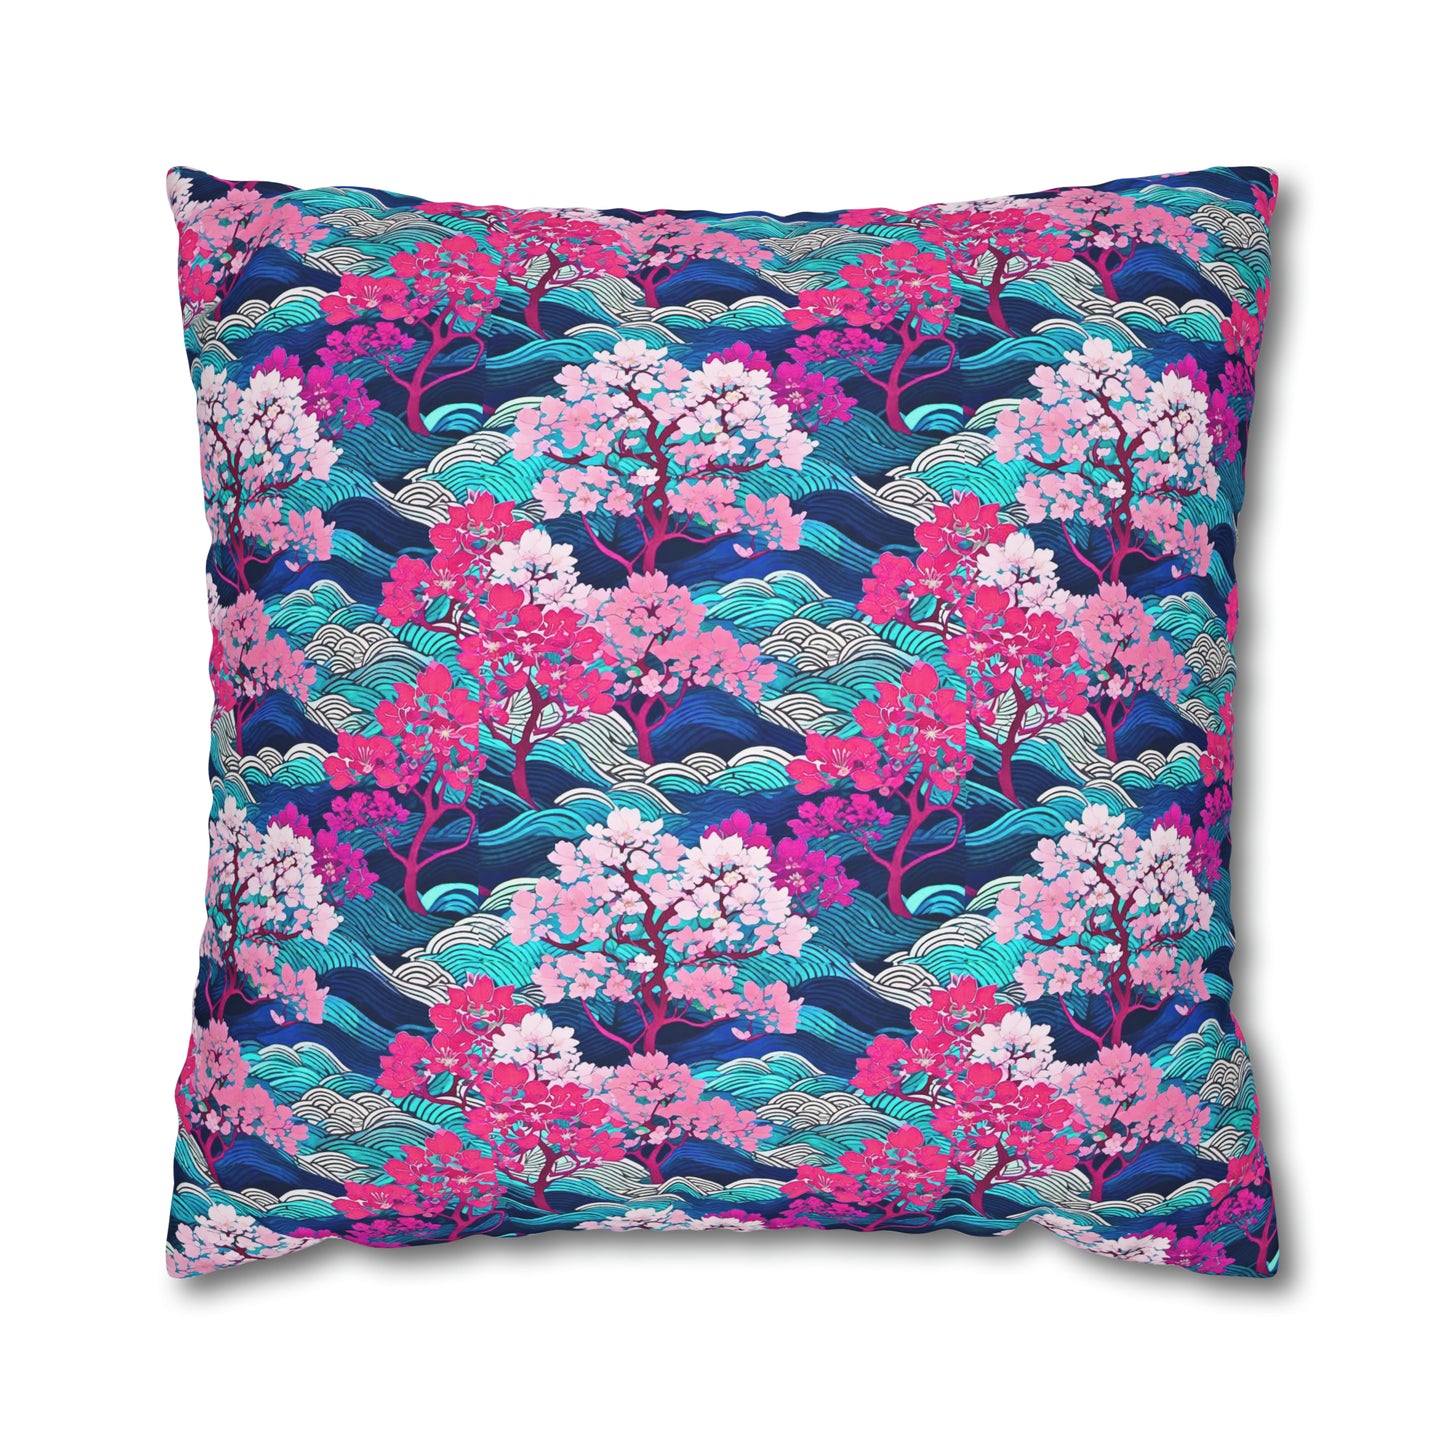 Kyoto Cherry Blossom Wood Block Pattern Japanese Home Decorative Spun Polyester Pillow Cover